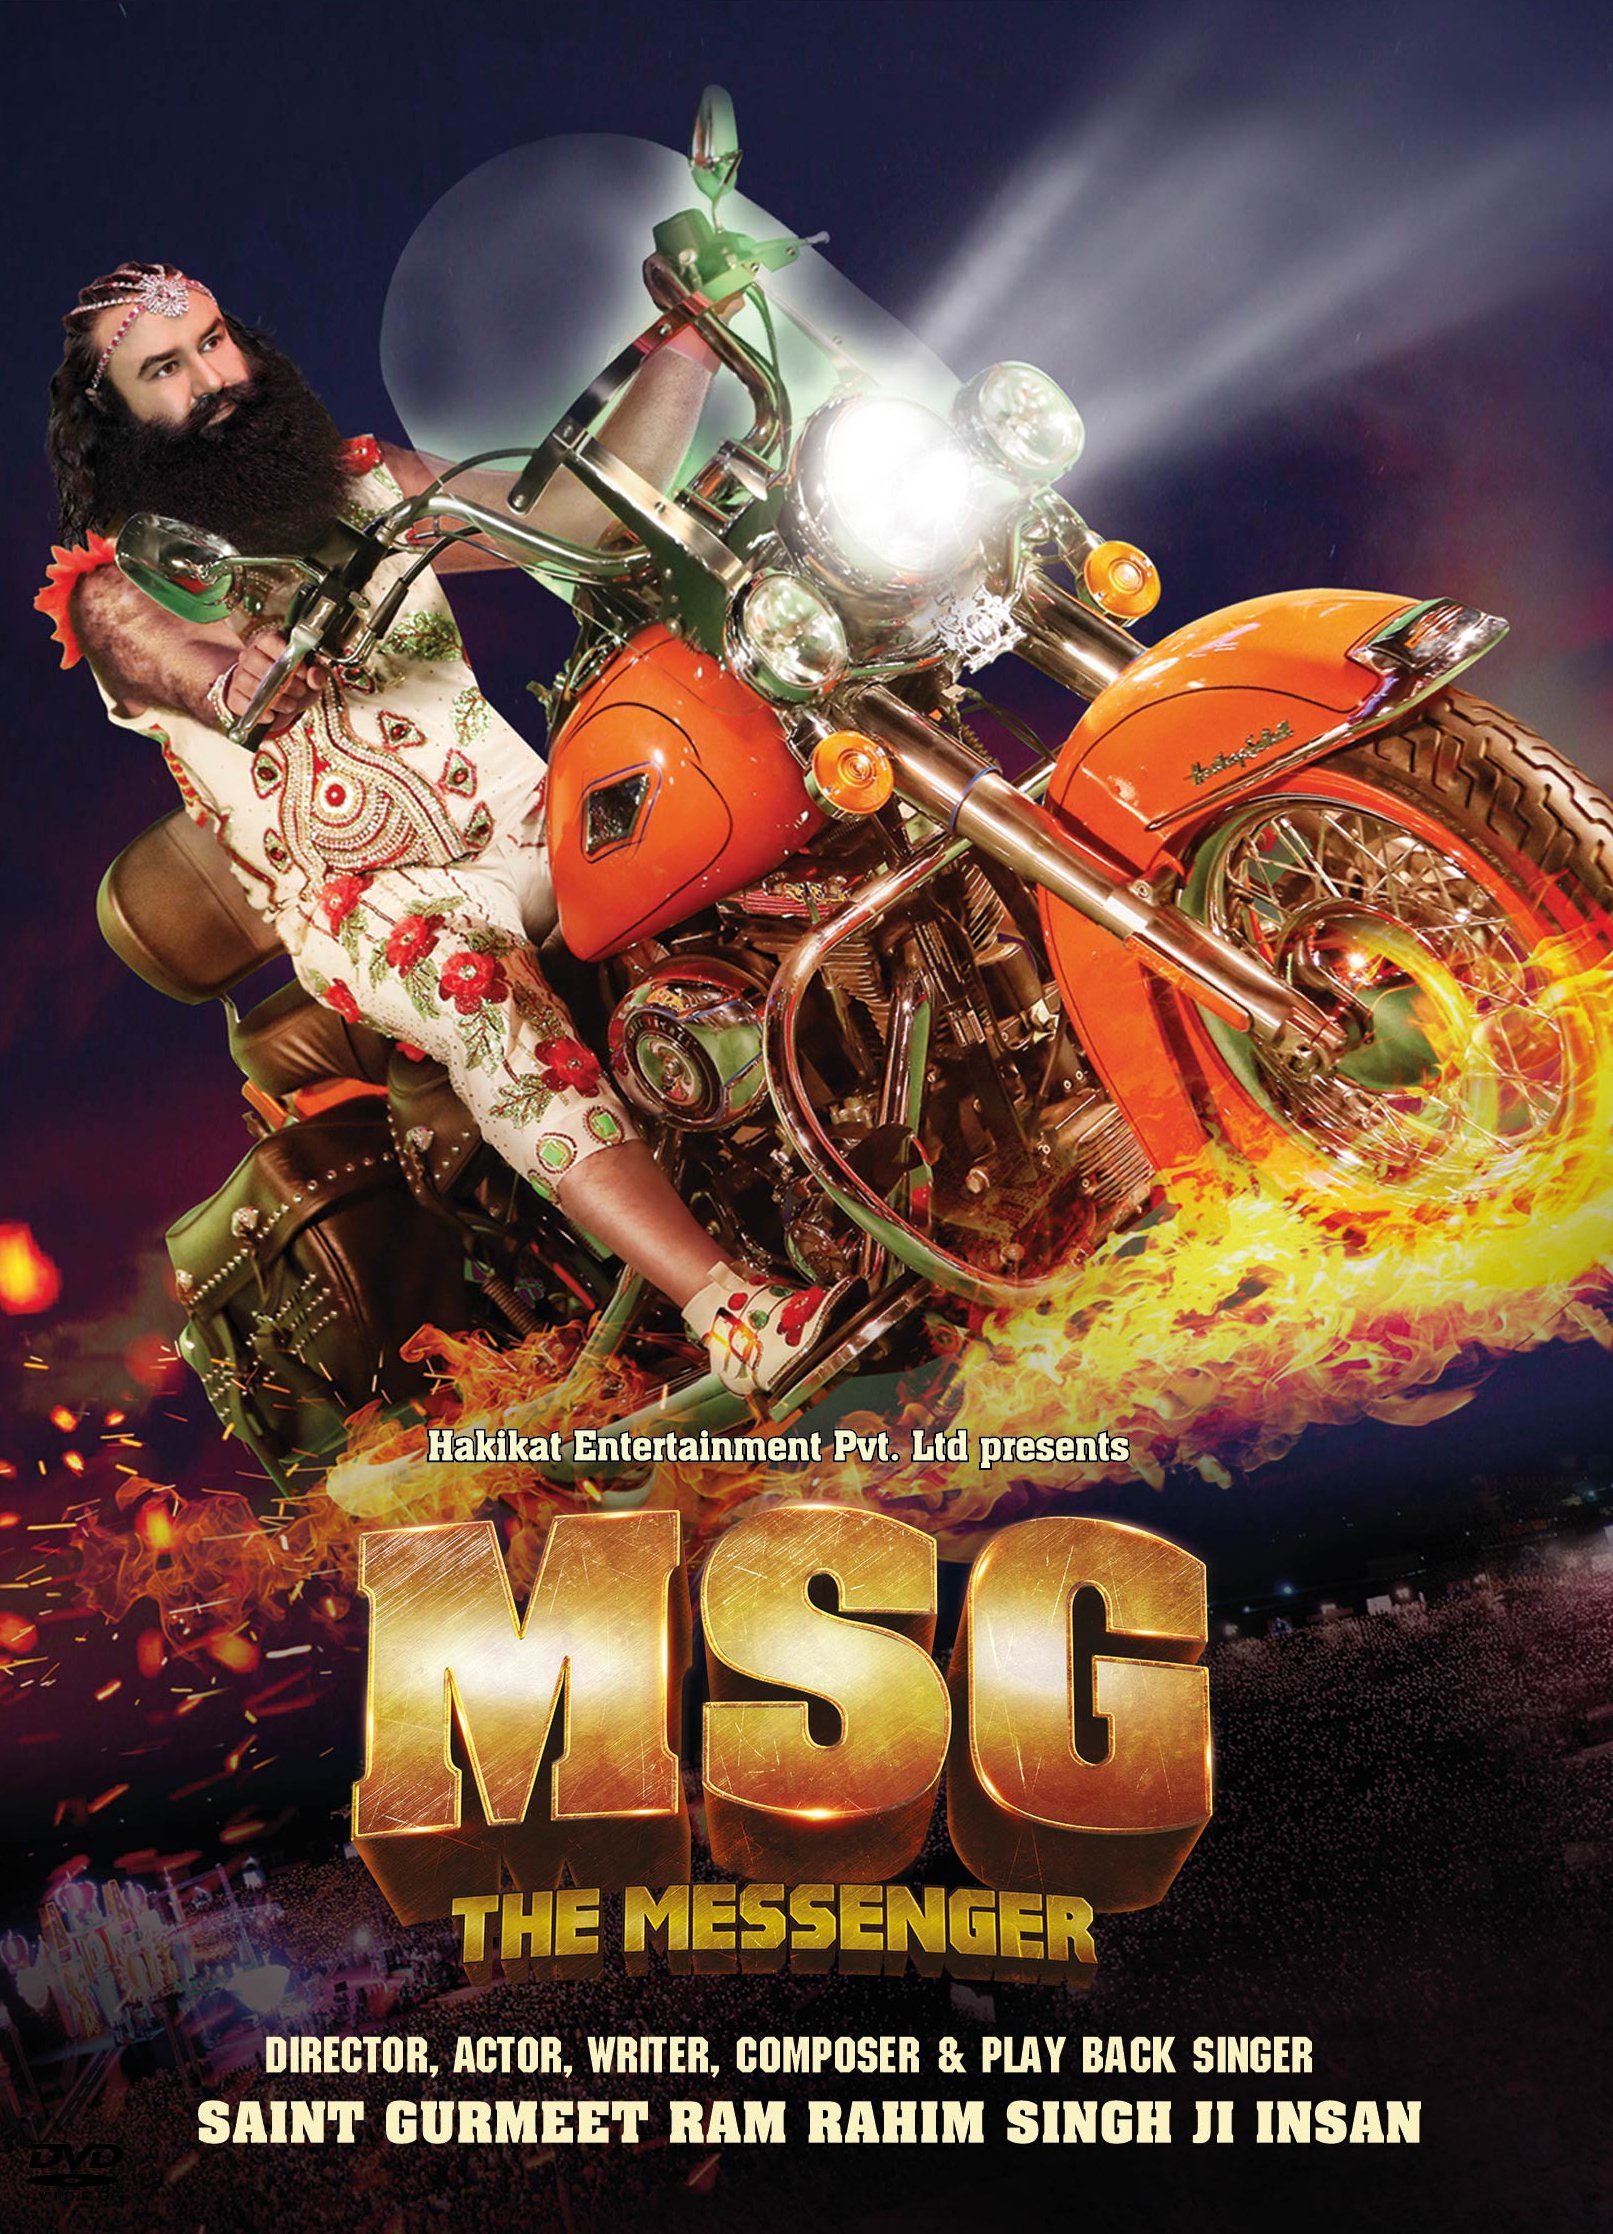 msg-the-messenger-movie-purchase-or-watch-online